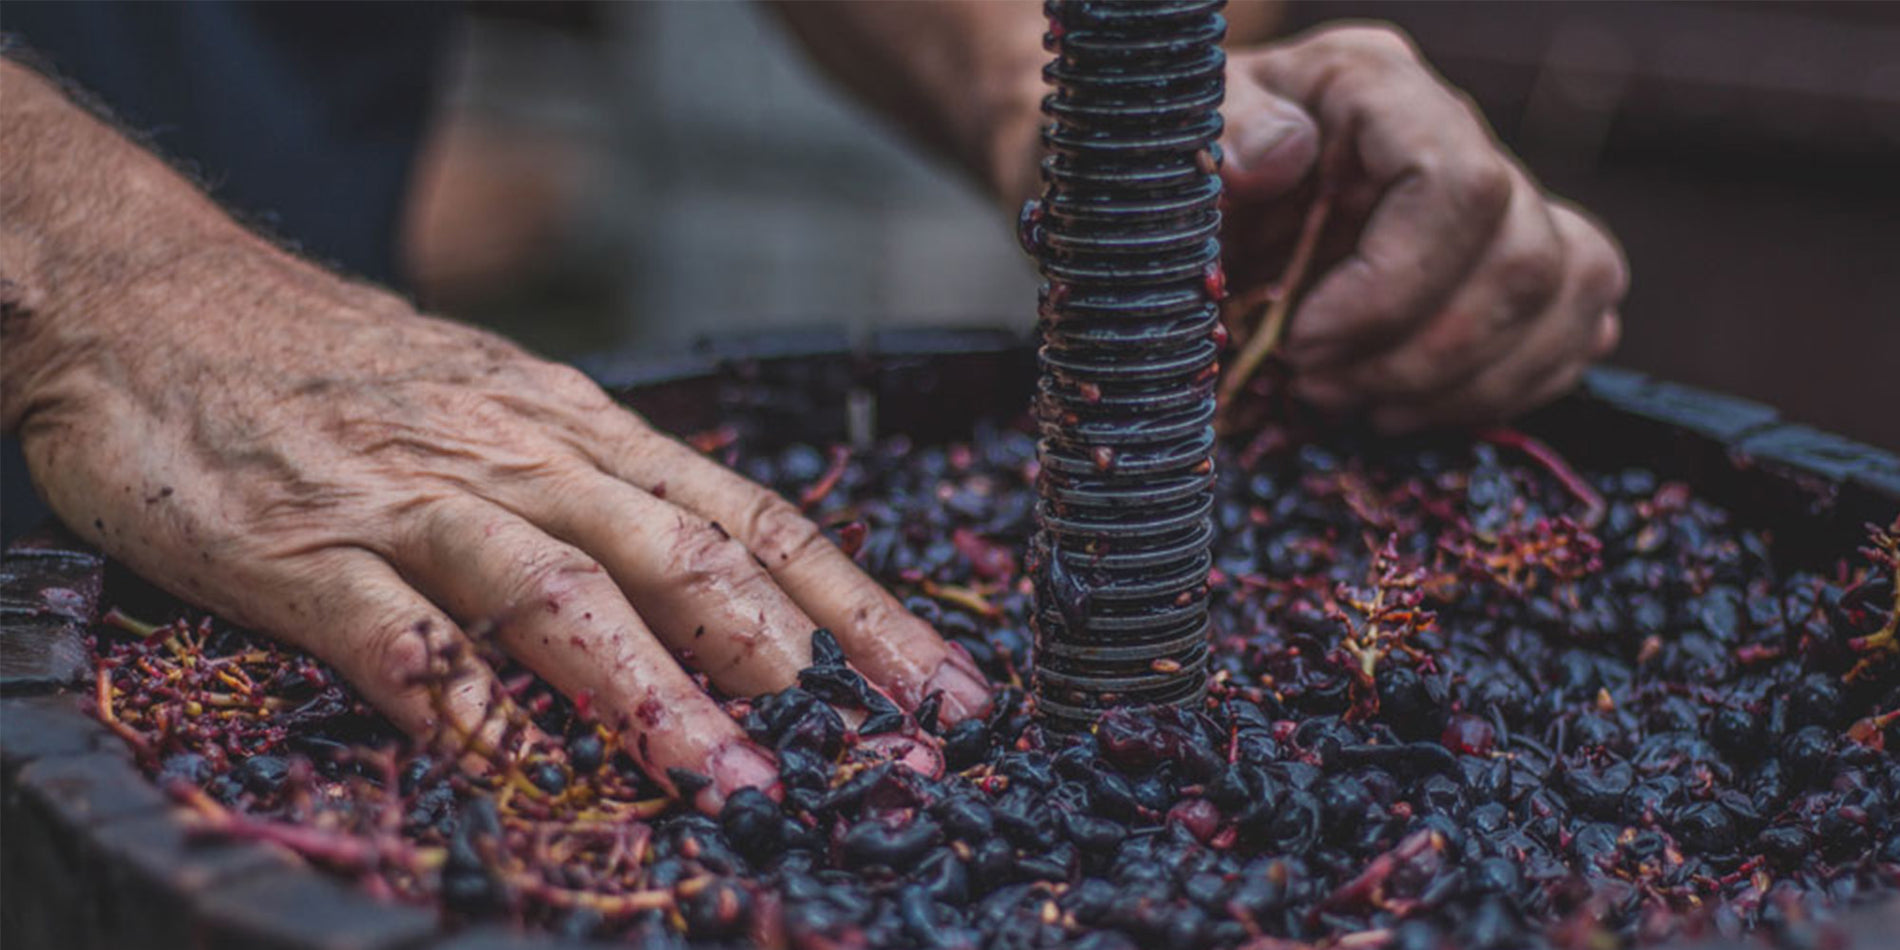 Want to Work in Wine? An Introduction to Nine Wine Careers - One Vine Wines